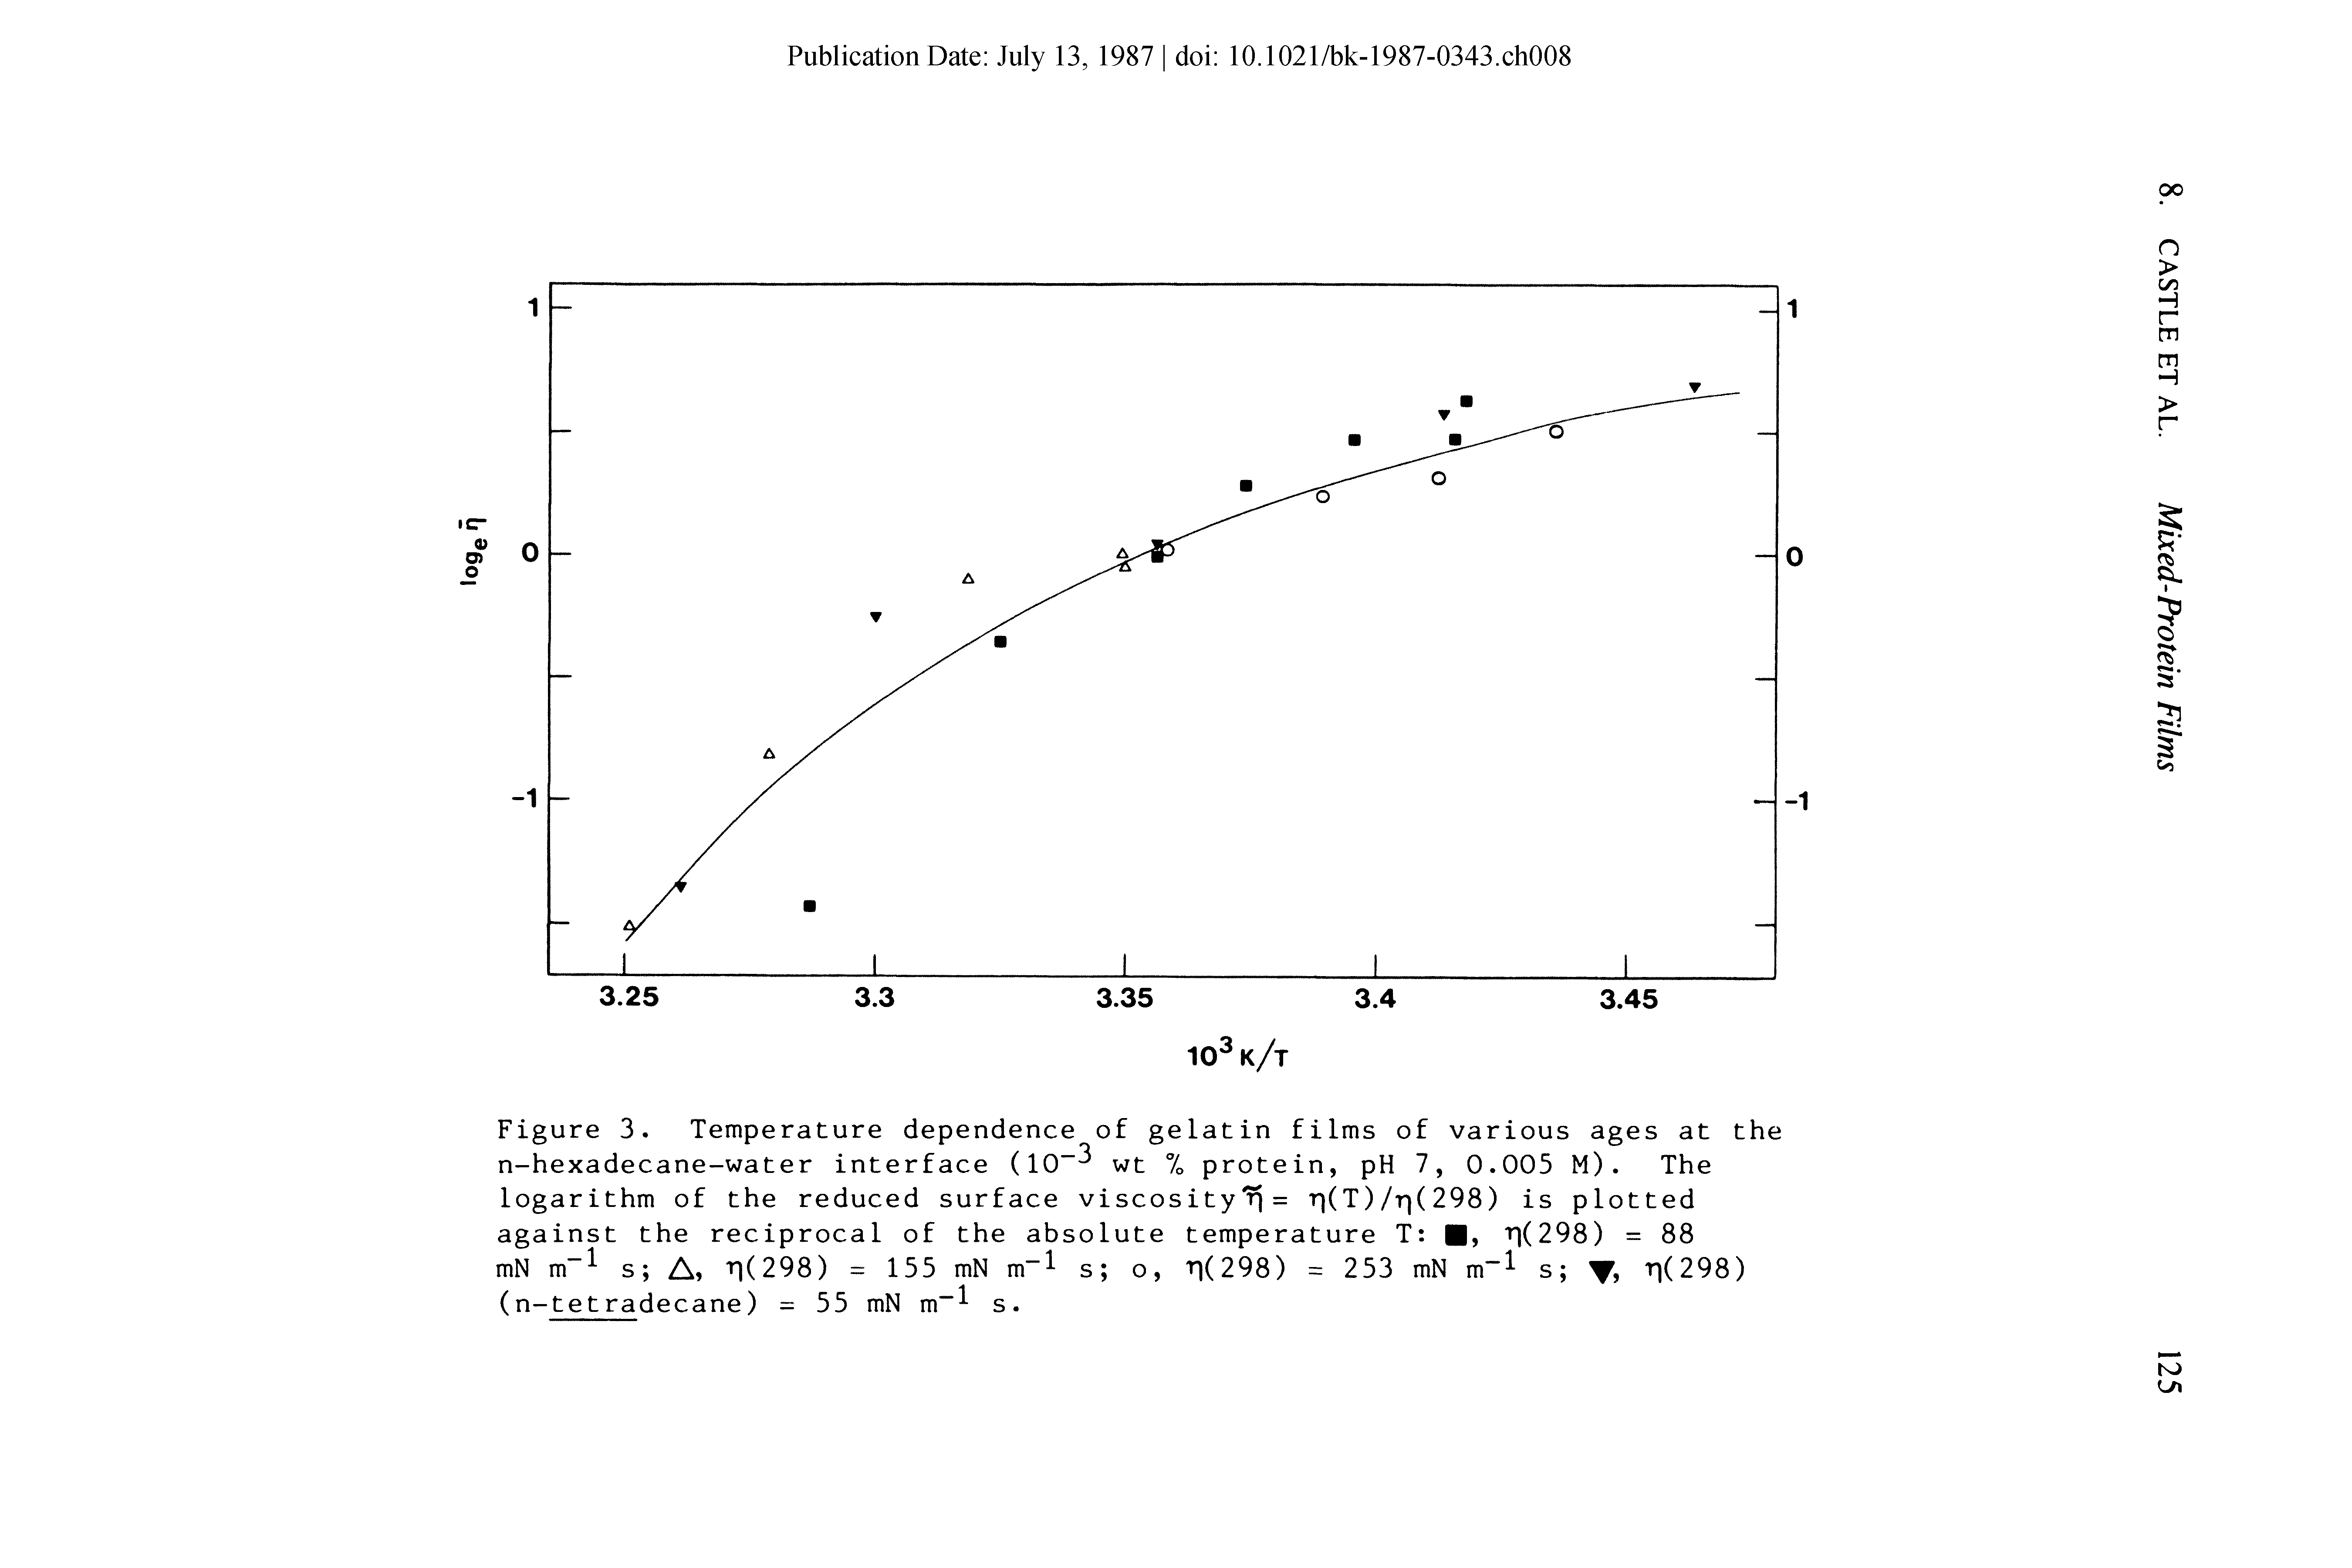 Figure 3. Temperature dependence of gelatin films of various ages at the n-hexadecane-water interface (10 wt % protein, pH 7, 0.005 M). The logarithm of the reduced surface viscosity = t)( T)/t)( 298) is plotted against the reciprocal of the absolute temperature T , r (298) = 88...